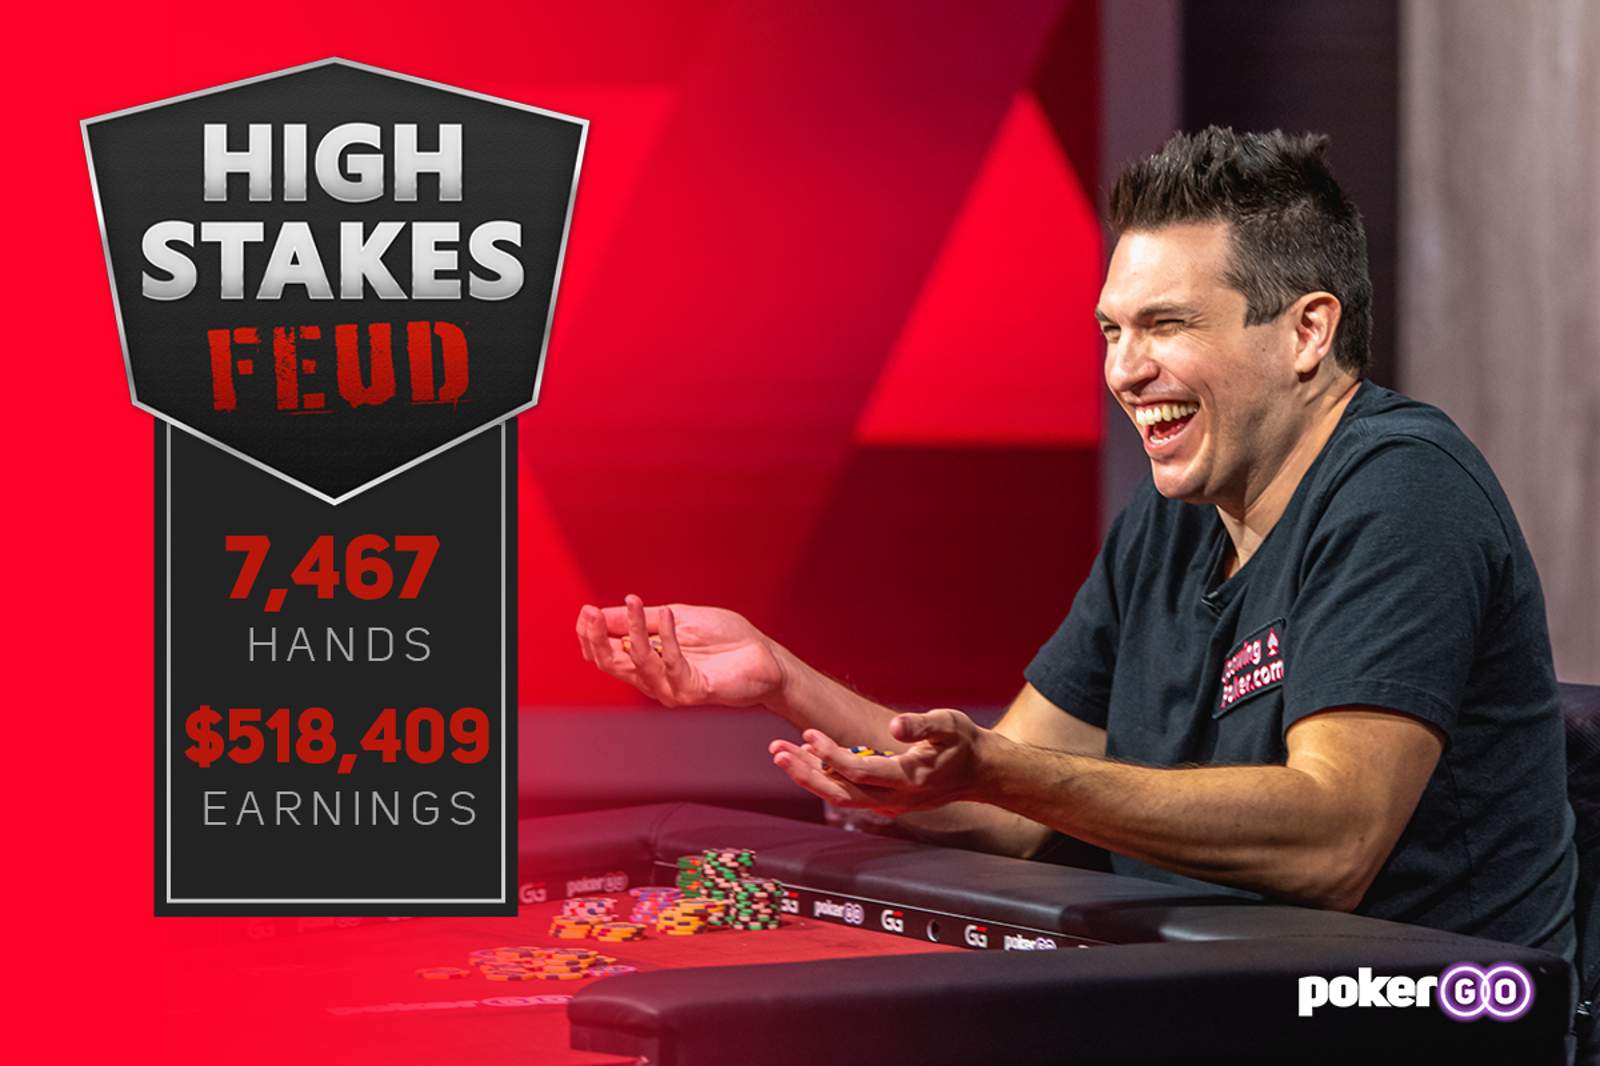 Doug Polk Leads Daniel Negreanu by $518,409 After 7,467 Hands in High Stakes Feud